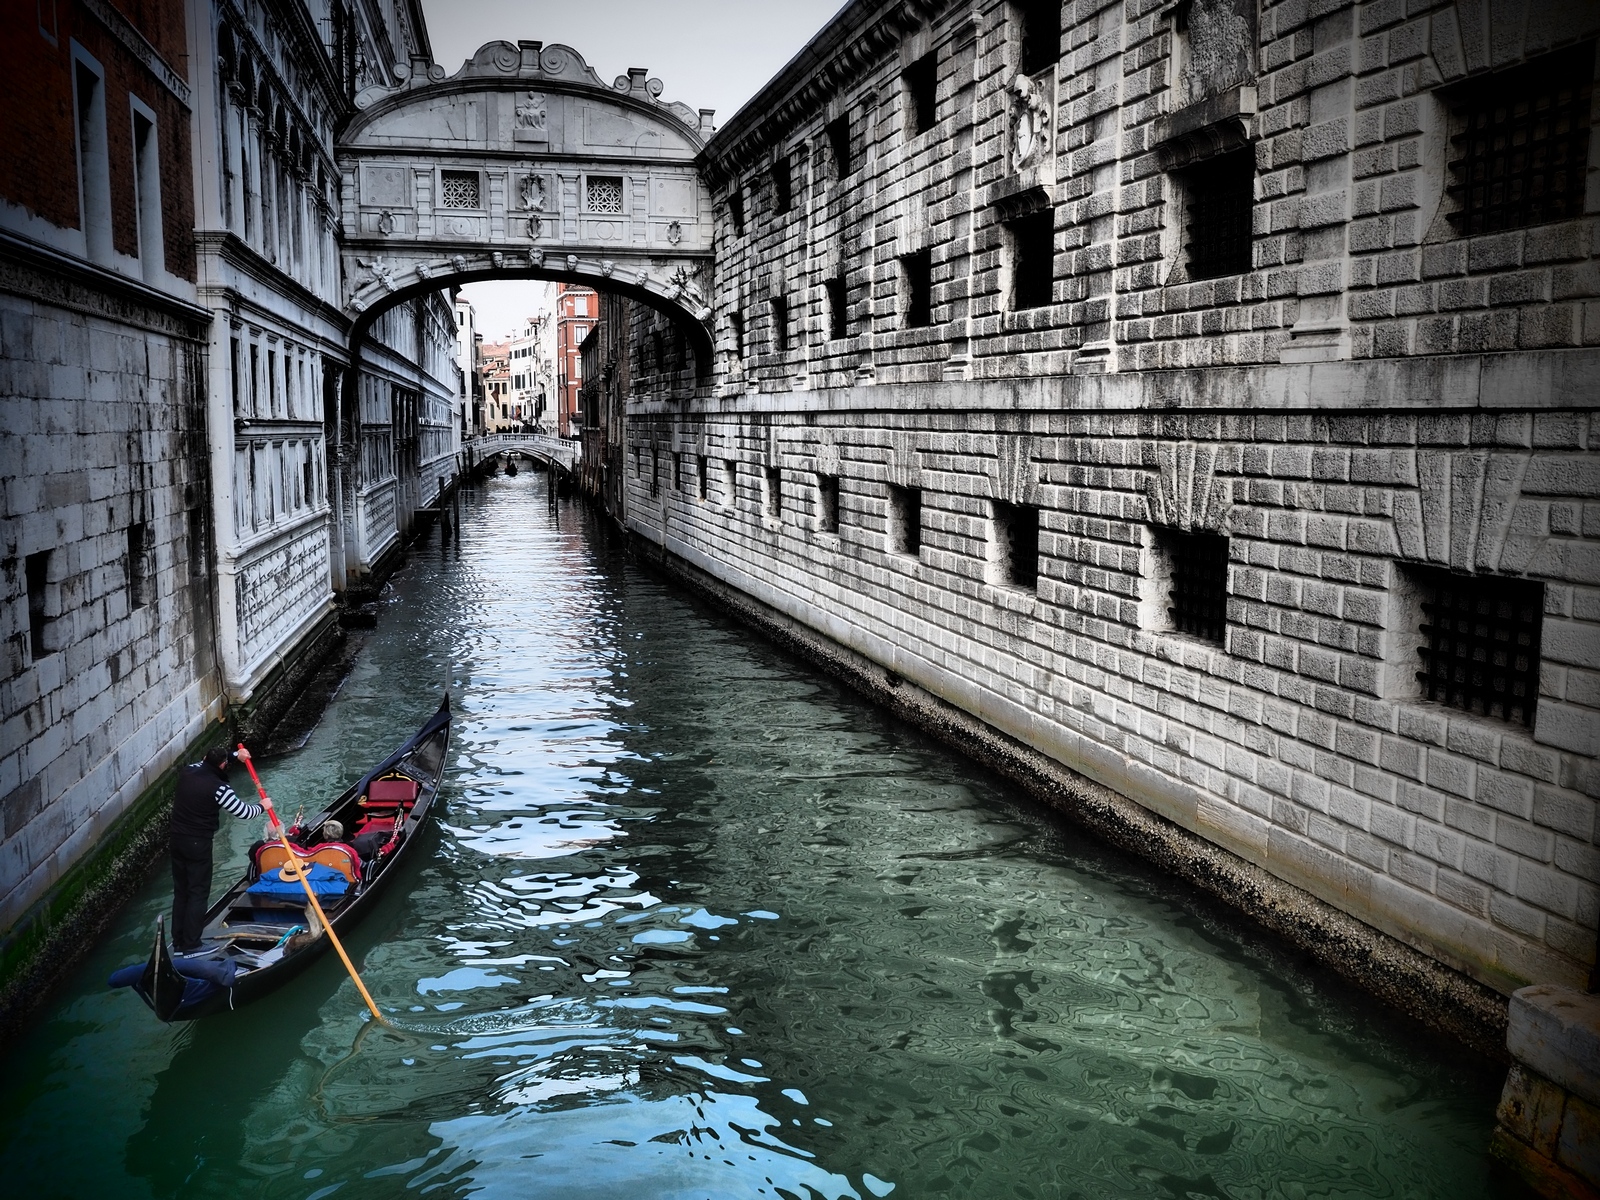 Processing at the Bridge of Sighs...